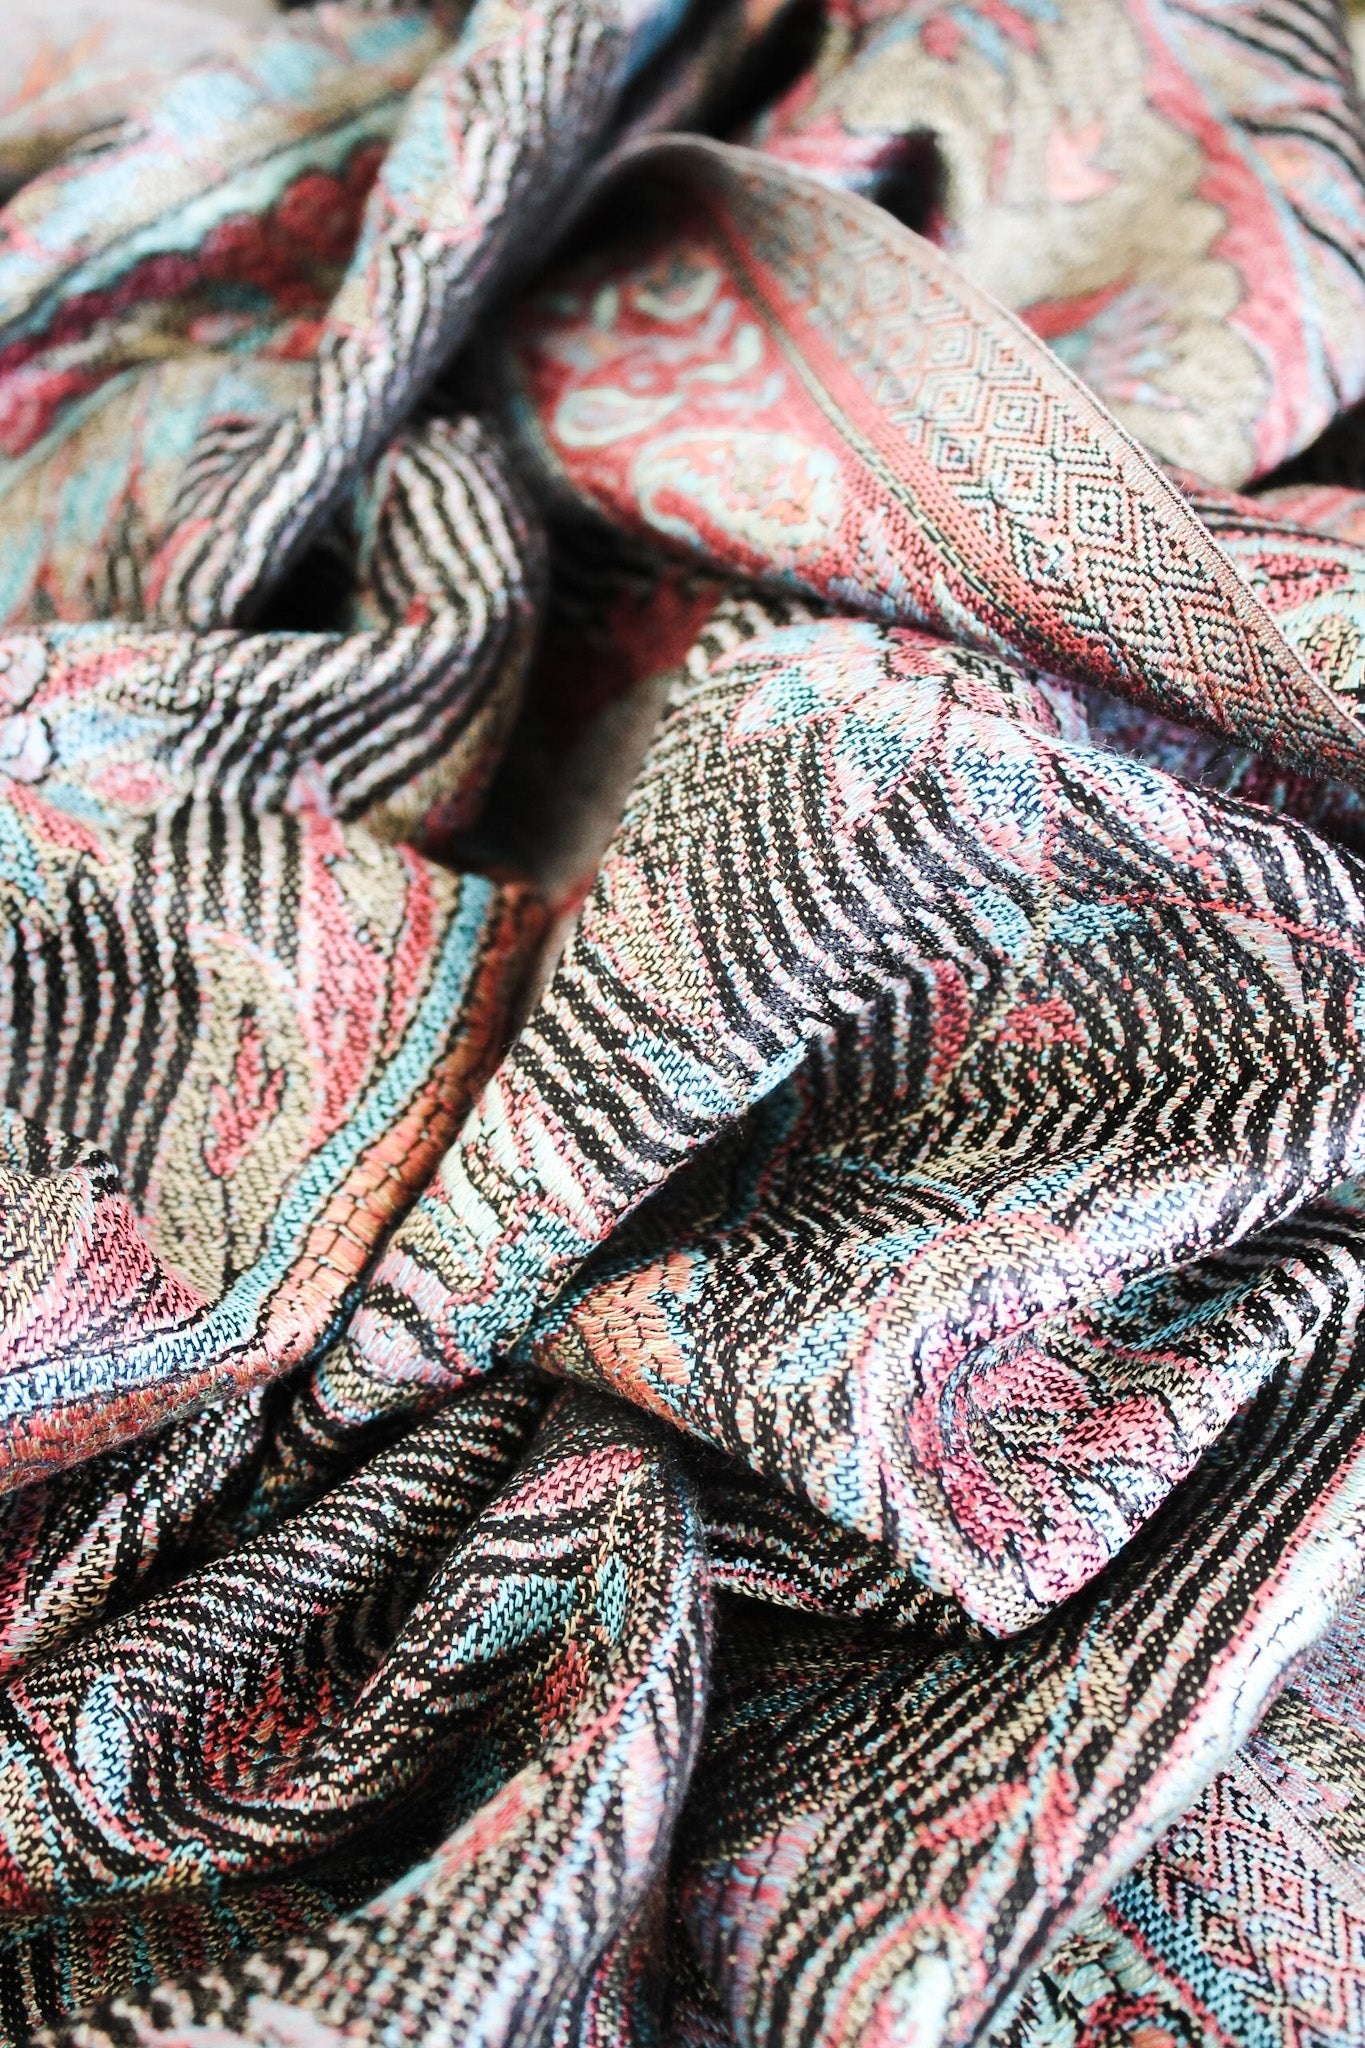 Intricate Black & Colored Woven Silk ScarfRare FindsScarf